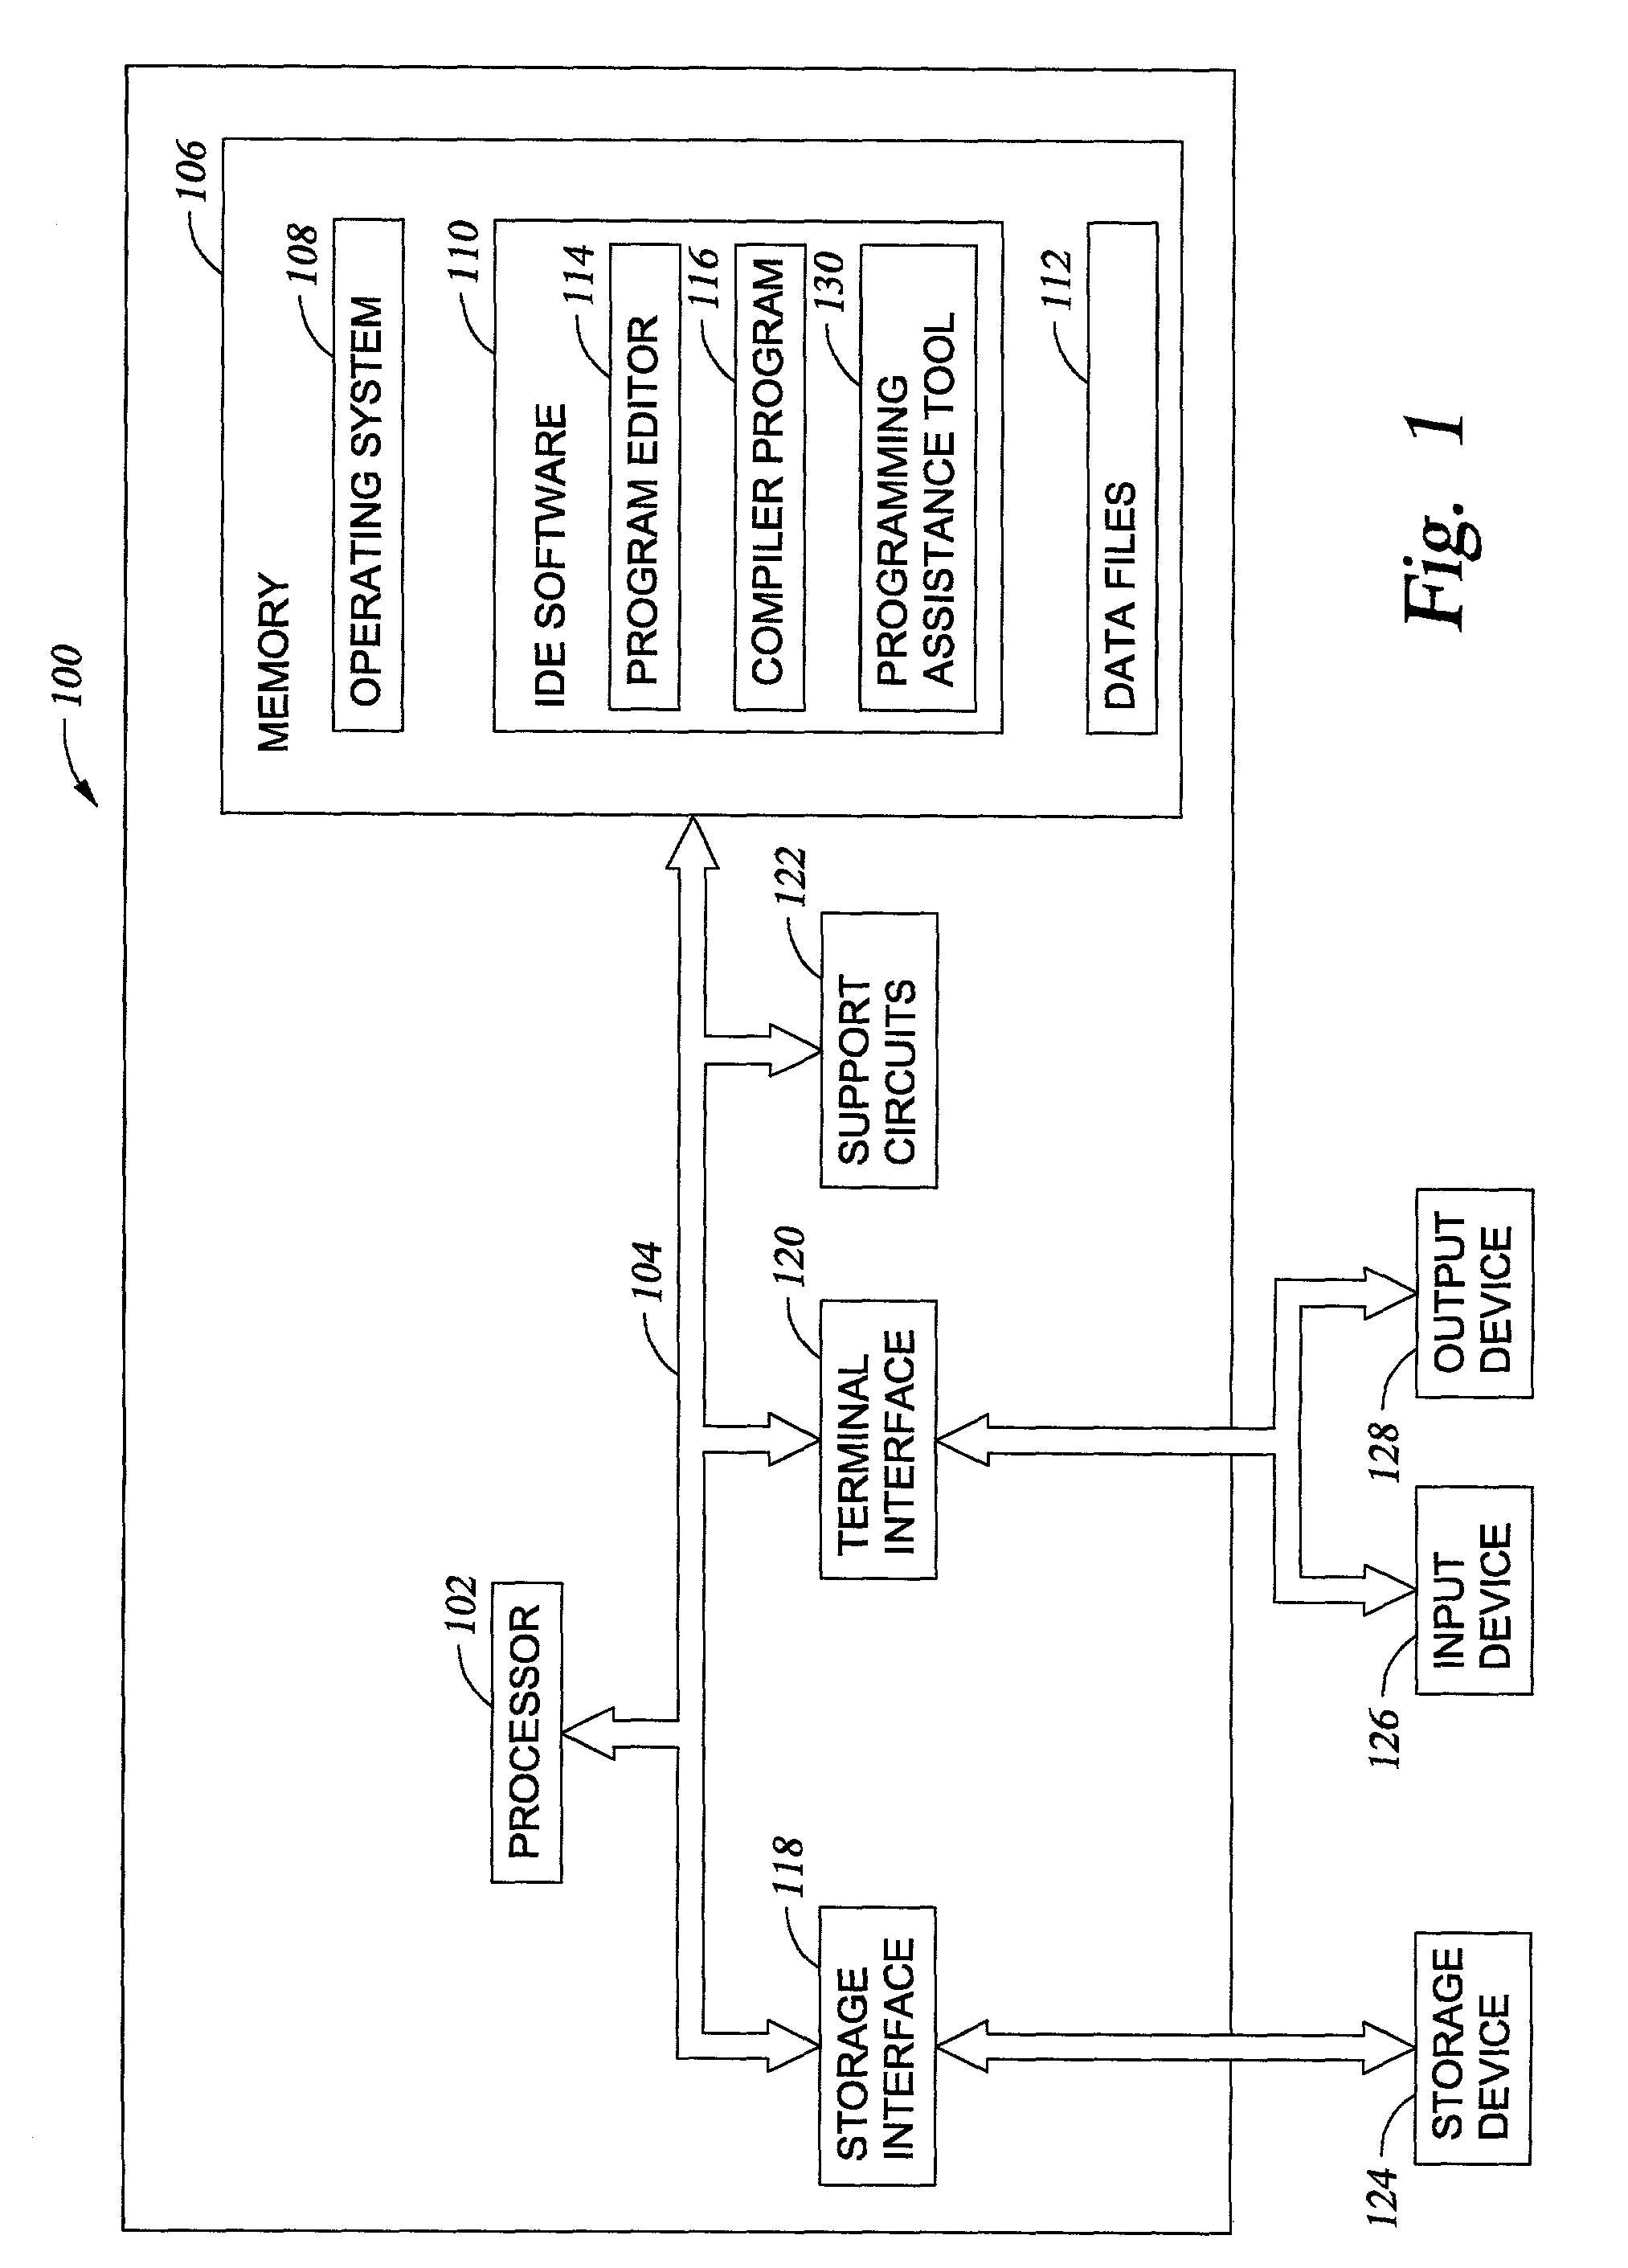 Method and apparatus for providing programming assistance